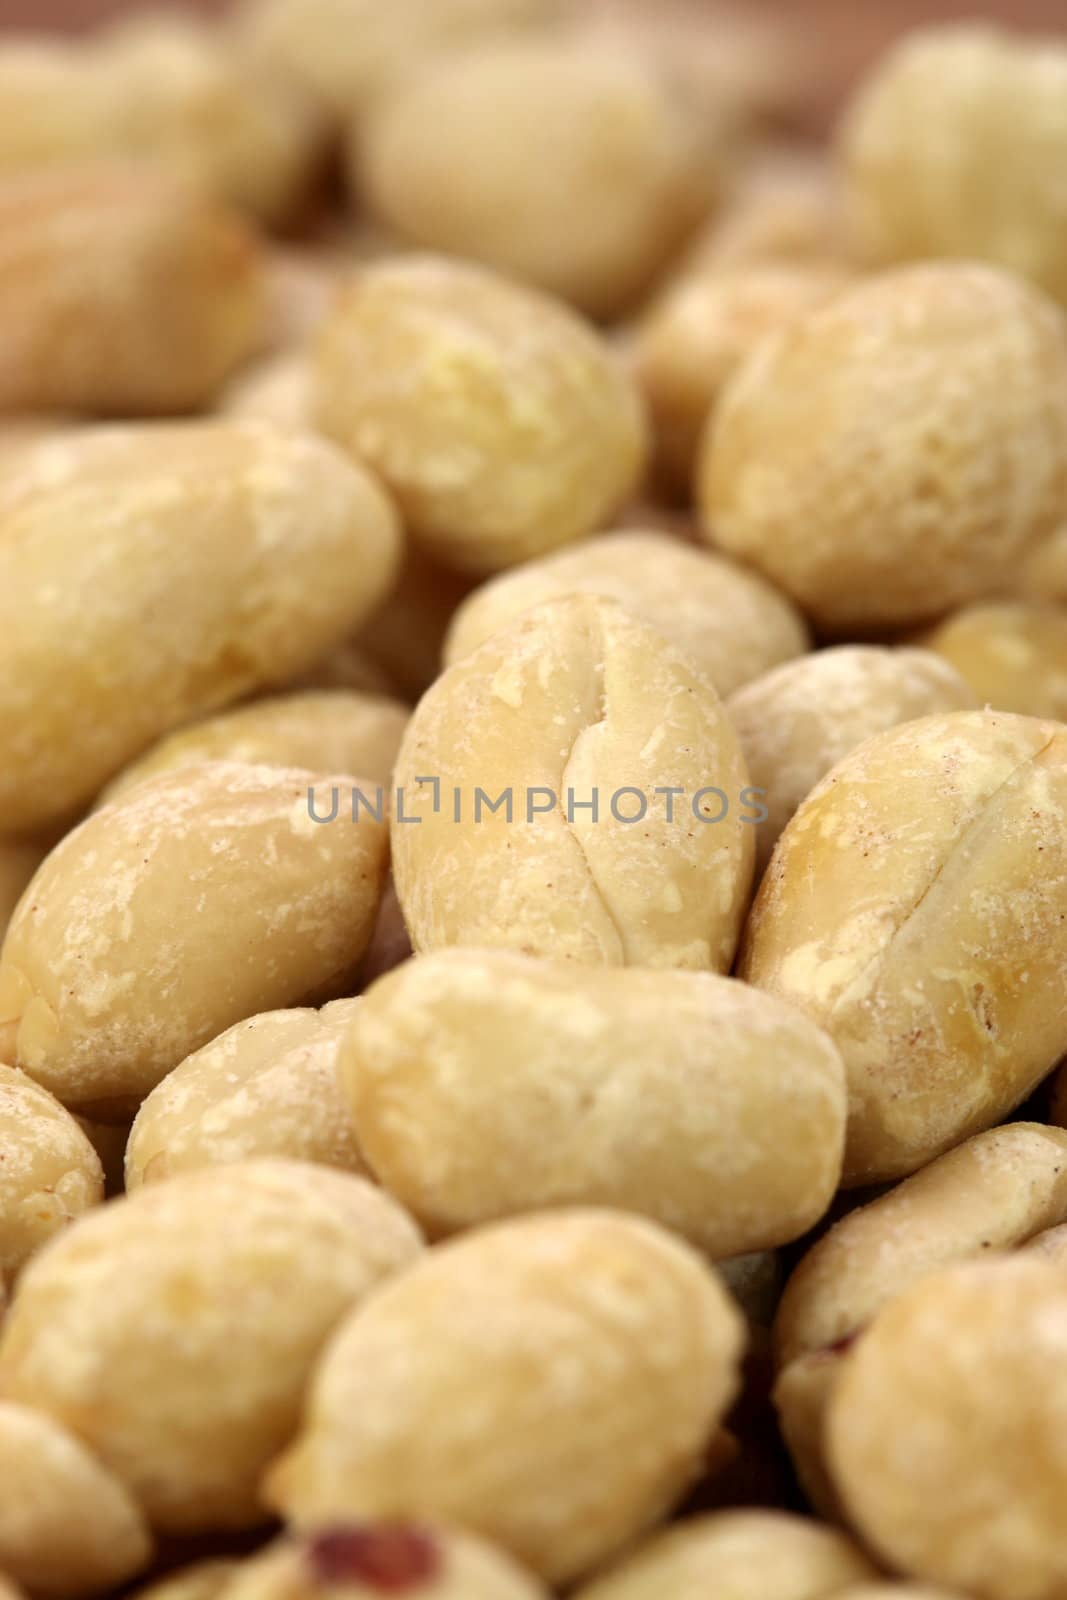 bunch of slow roasted peanuts, perfect amount of protein,carbs and healthy oils in a delicious edible